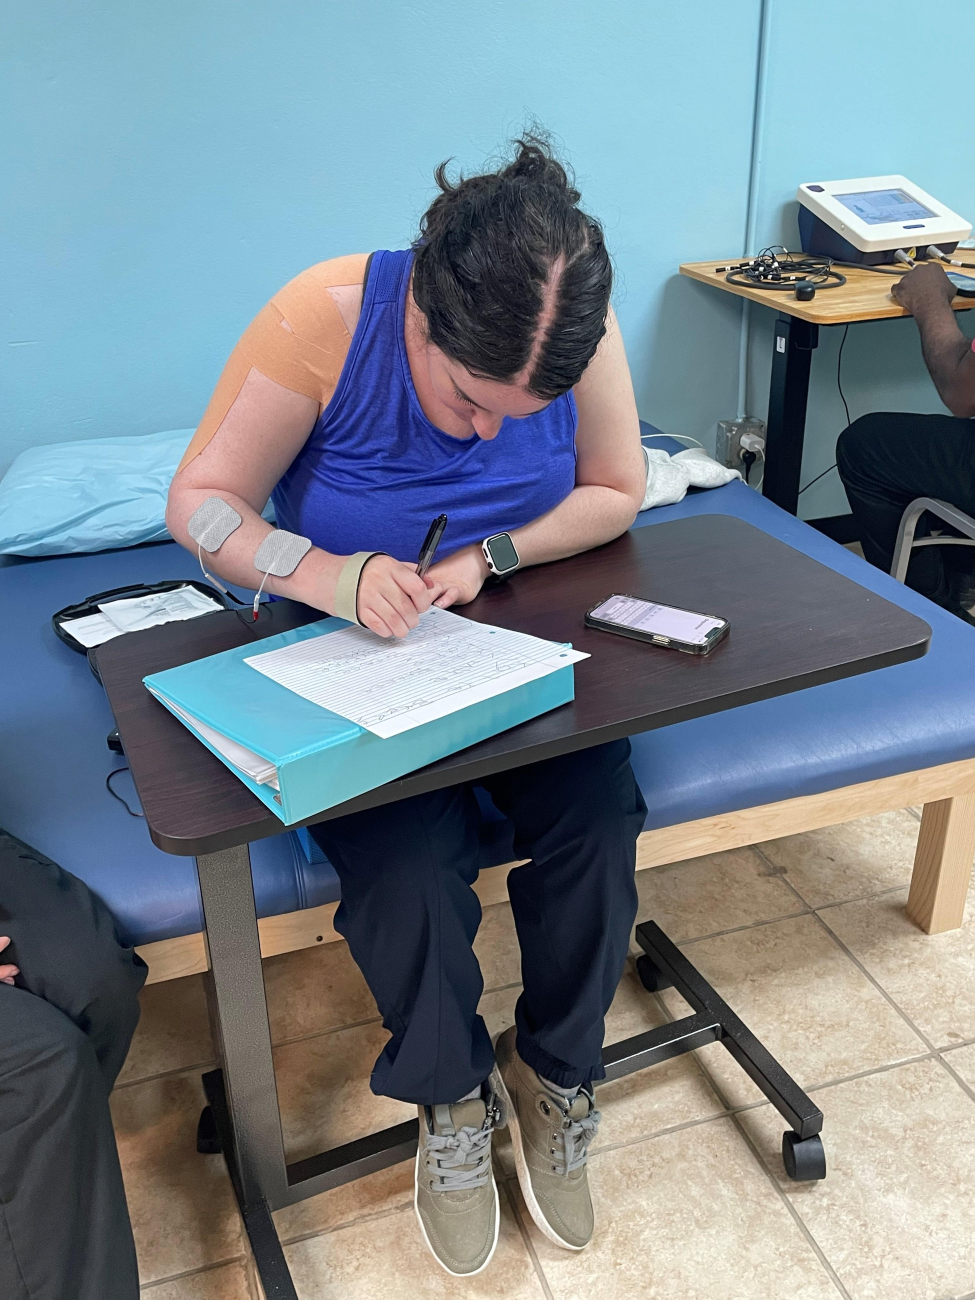 Katie Breece practices writing as part of her rehabilitation therapy after experiencing a stroke at 27 years old. (Photo courtesy of Katie Breece)